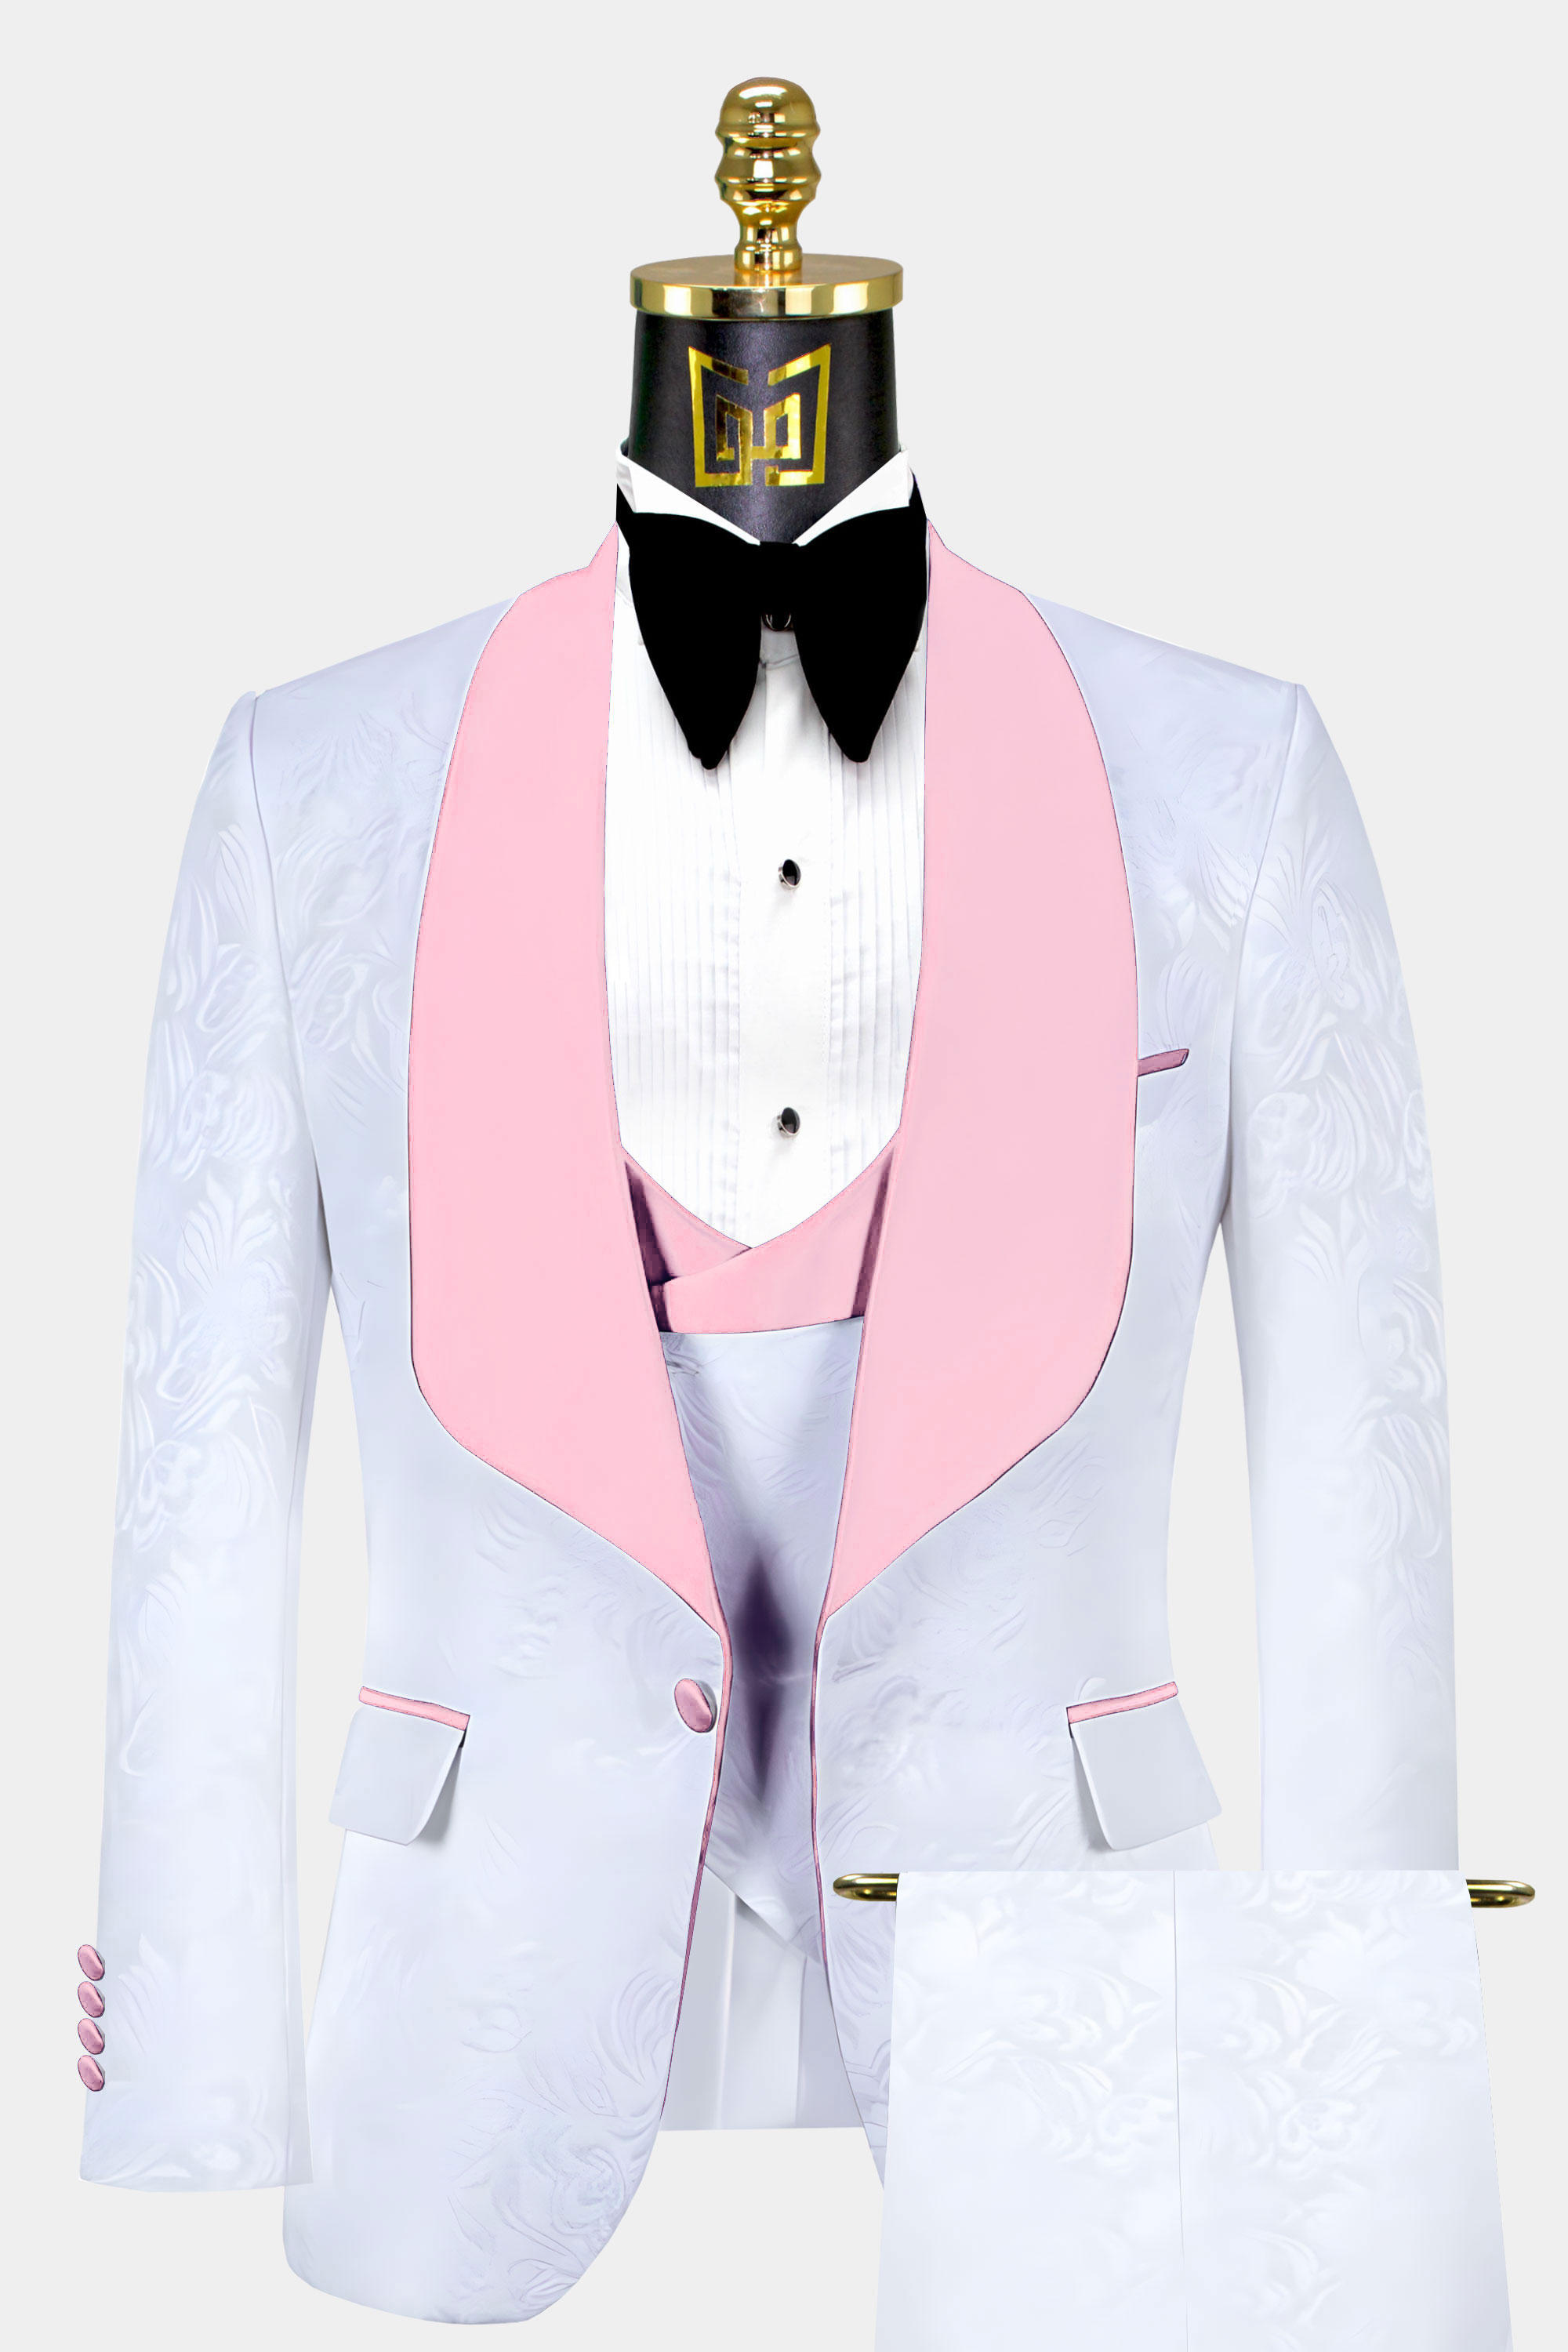 Floral Light Pink & White Tuxedo - 3 Piece 42r White Matching Pant